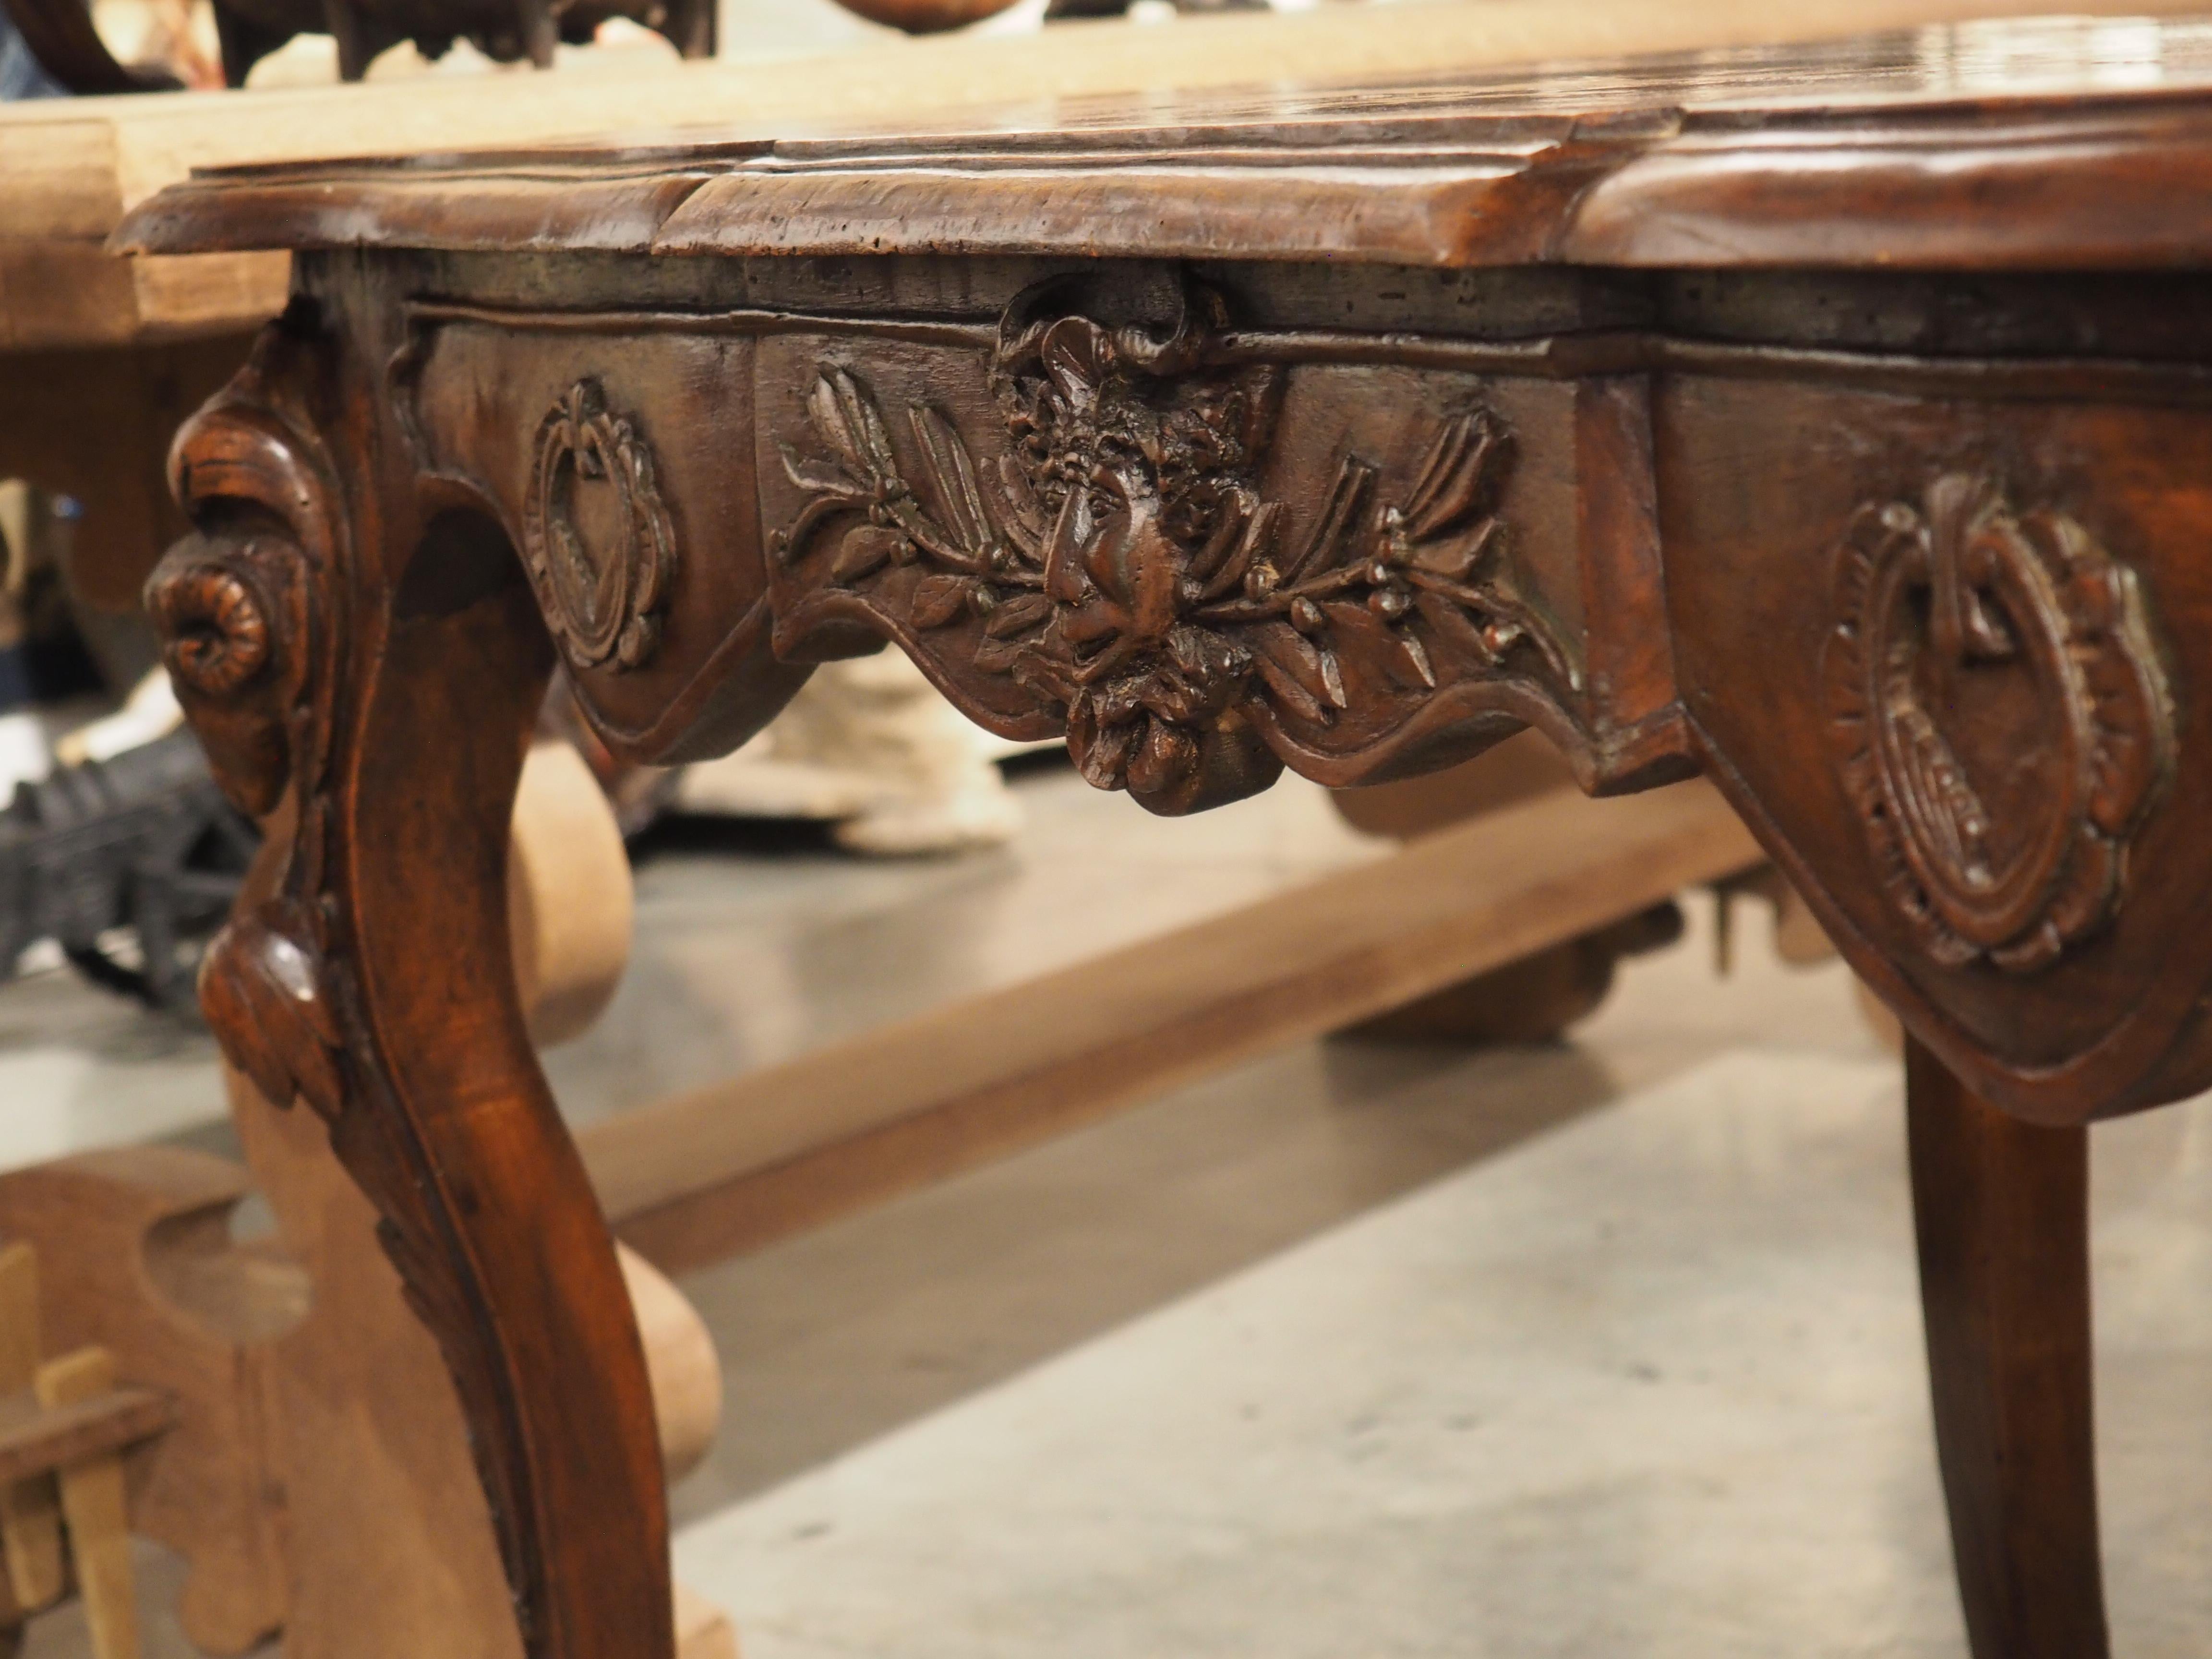 Circa 1870 French Walnut Wood Center Table with Rams' Heads and Fleur De Lys For Sale 13